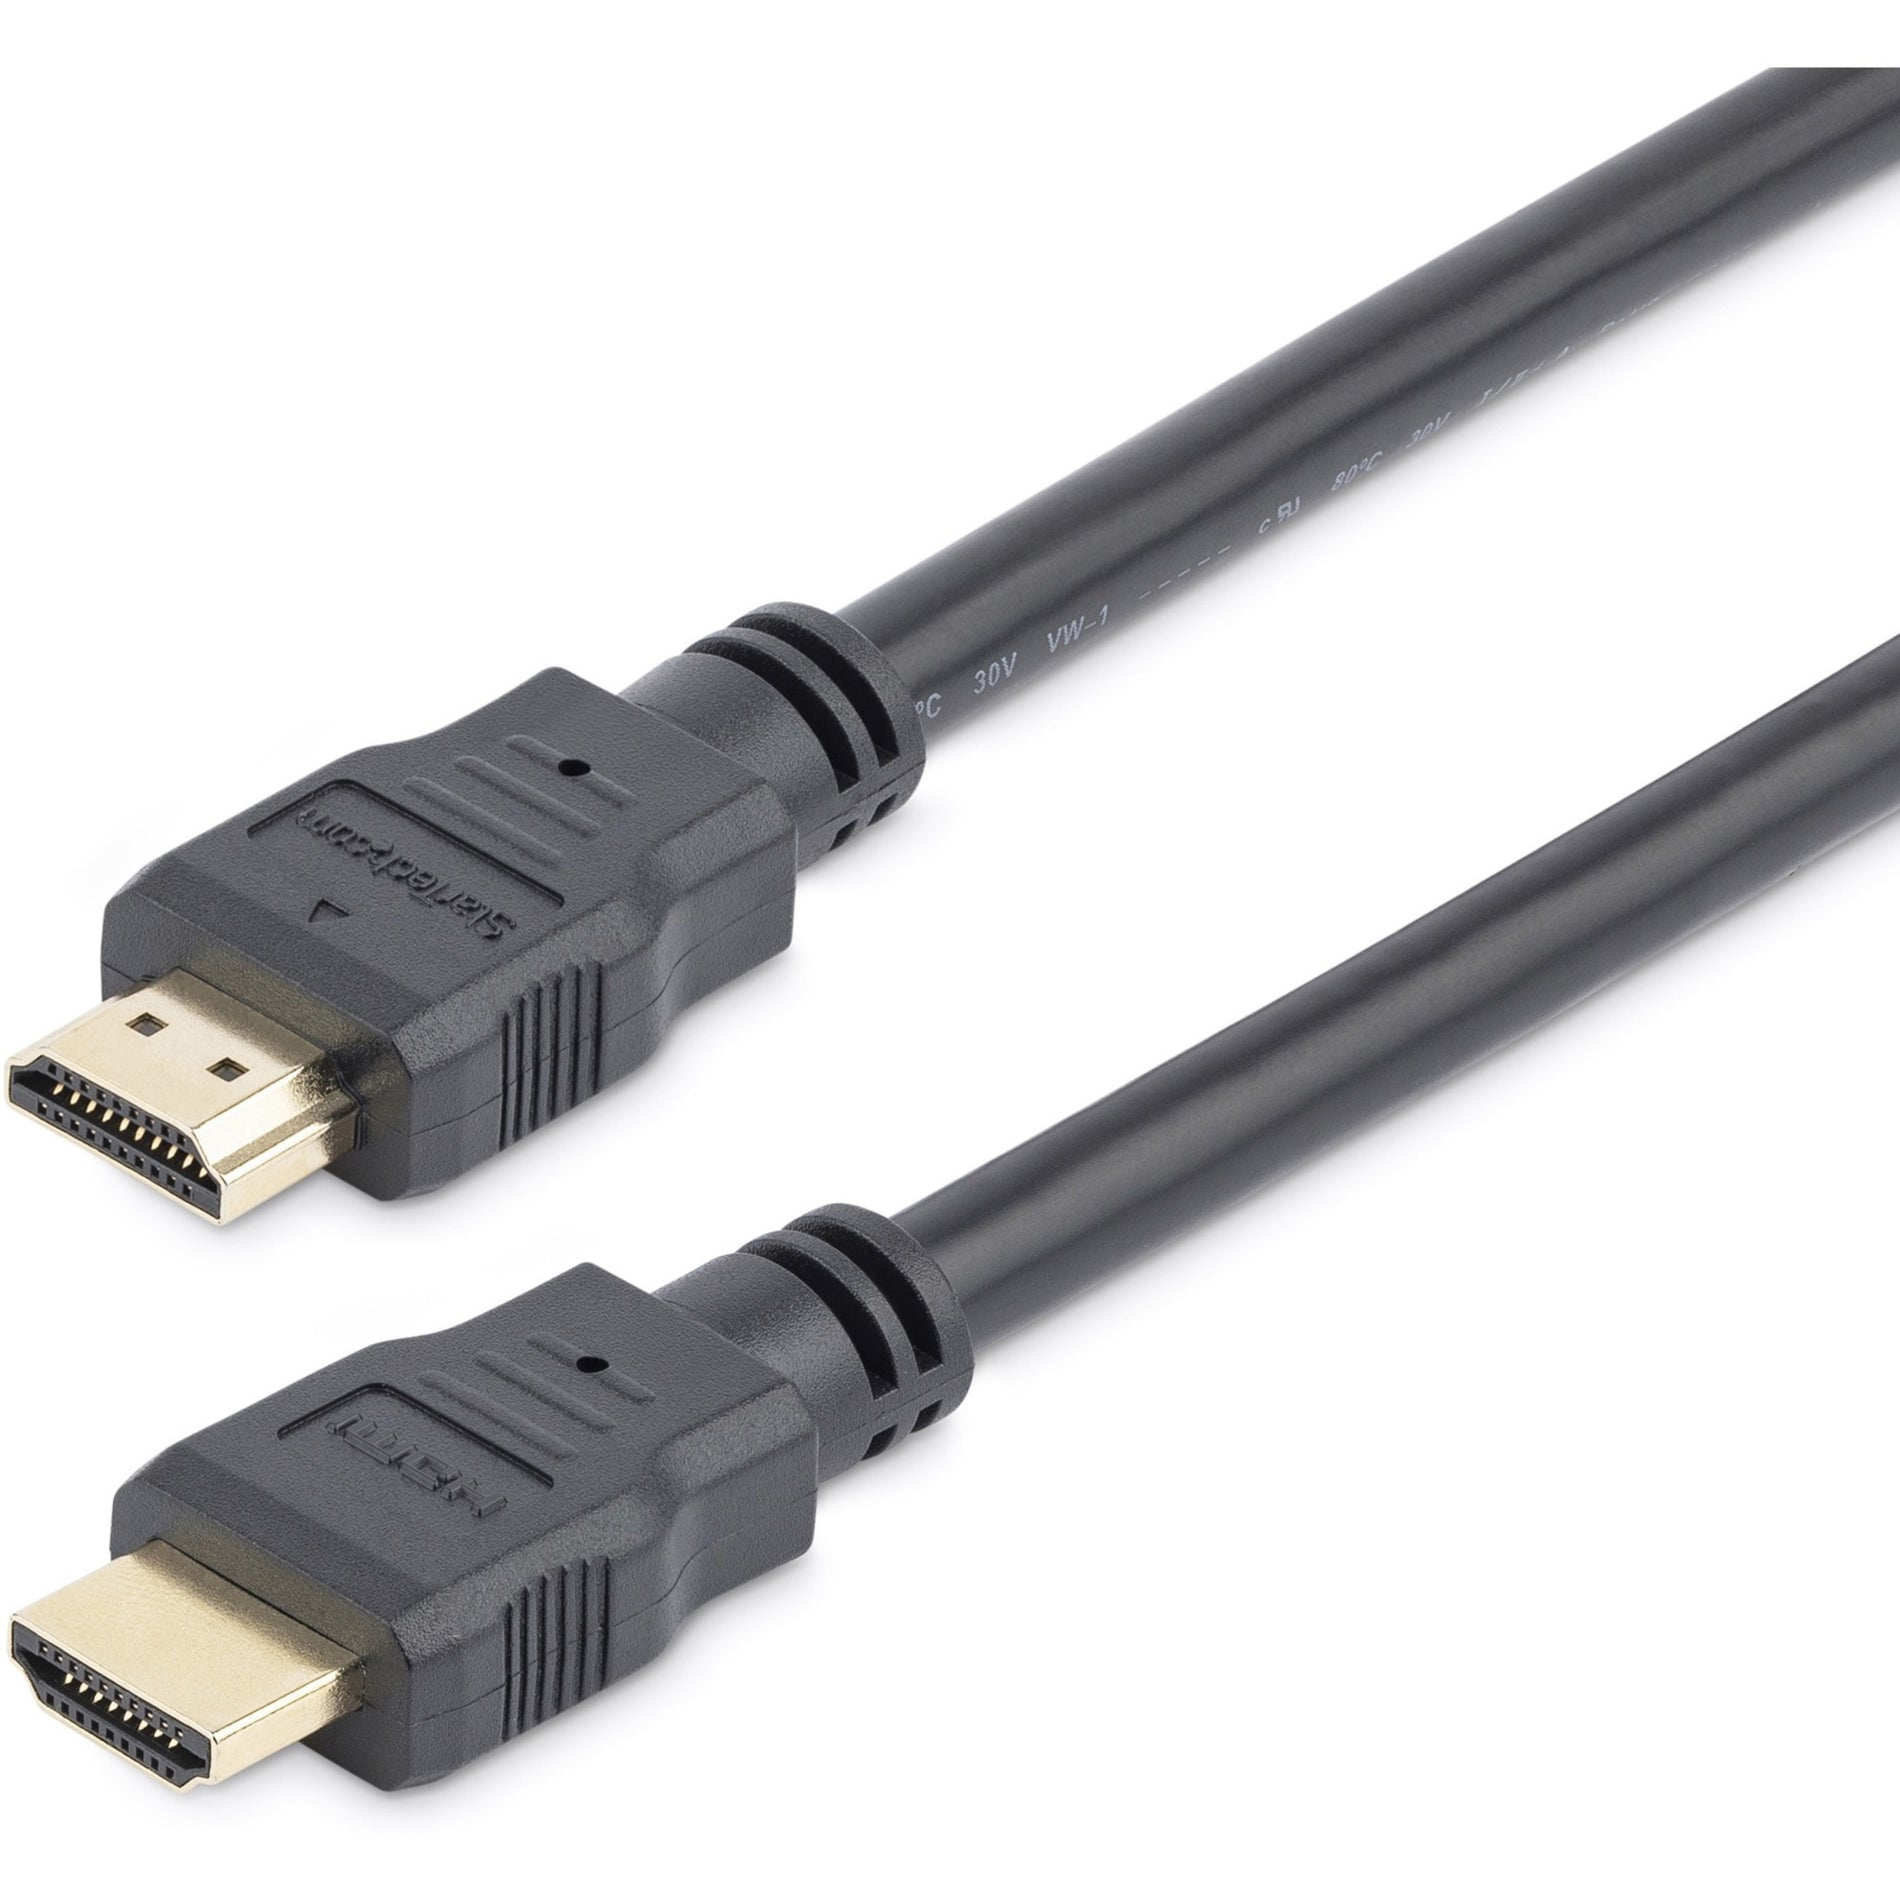 StarTech.com HDMM5M 5m High Speed HDMI Cable - Ultra HD 4k x 2k HDMI Cable, Molded, Corrosion Resistant, Strain Relief, Gold Plated Connectors